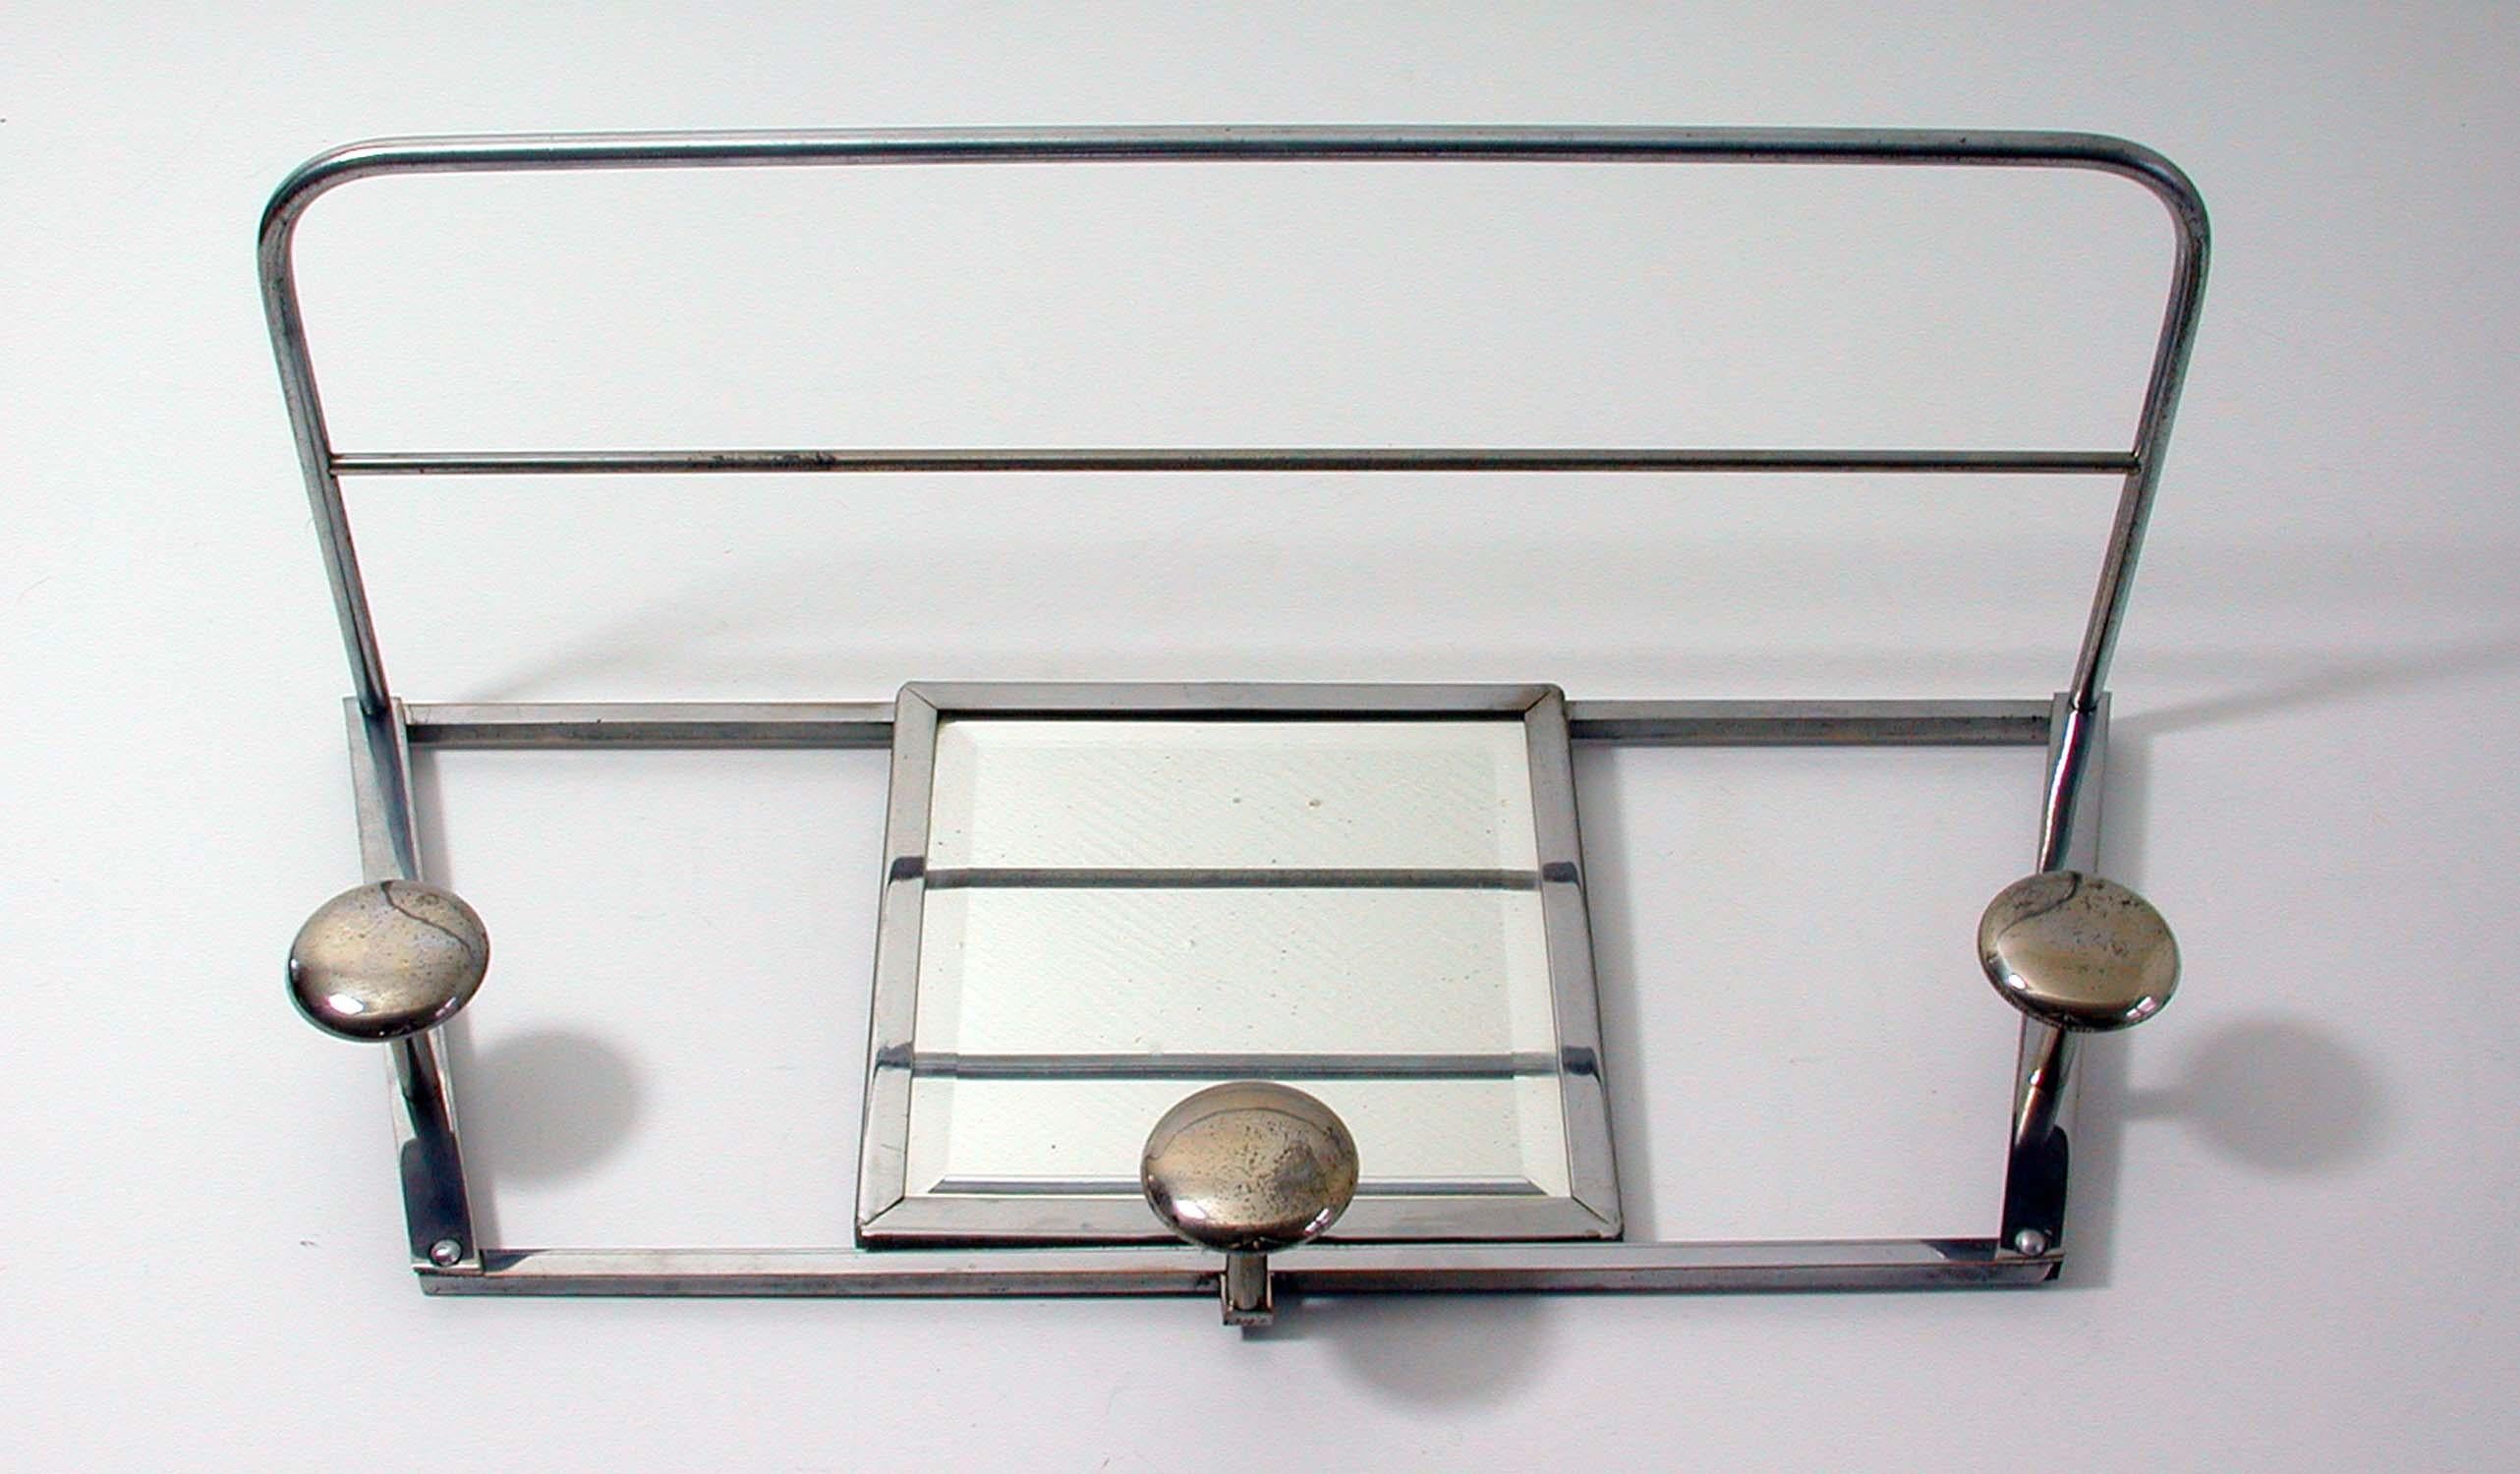 Art Deco French Industrial Chrome Coat and Hat Rack with Mirror, 1930s 5